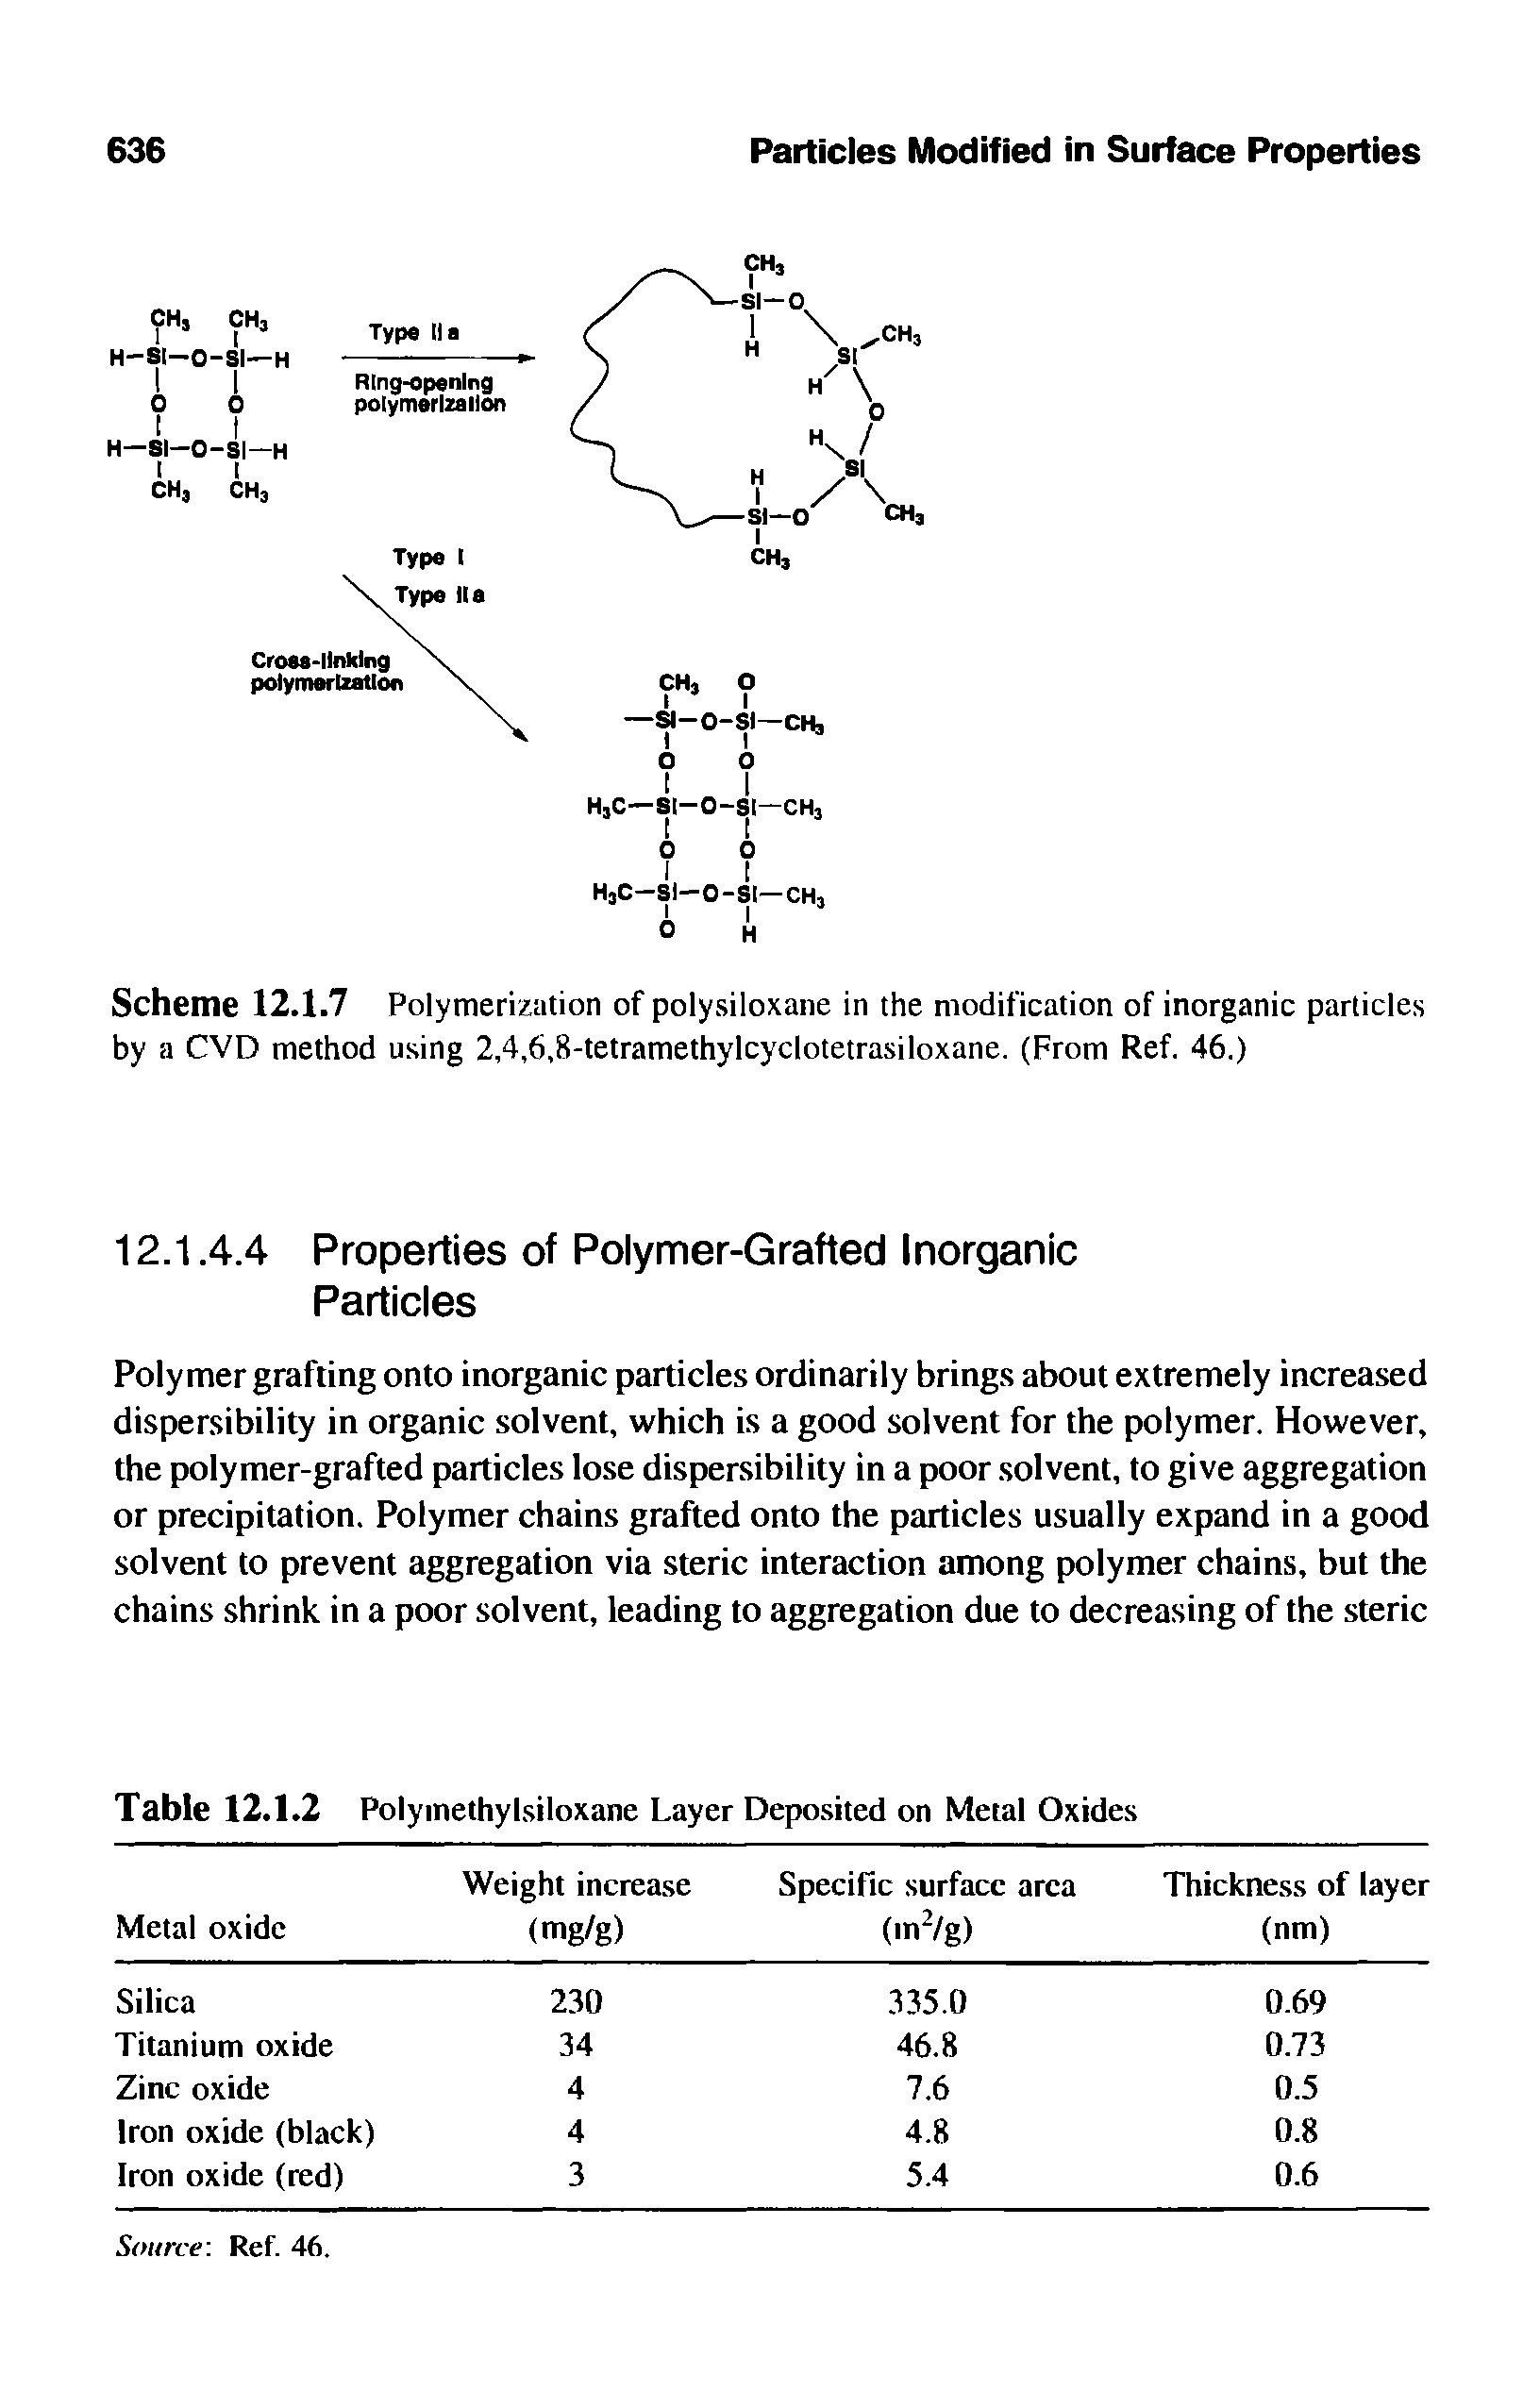 Scheme 12.1.7 Polymerization of polysiloxane in the modification of inorganic particles by a CVD method using 2,4,6,8-tetramethylcyclotetrasiloxane. (From Ref. 46.)...